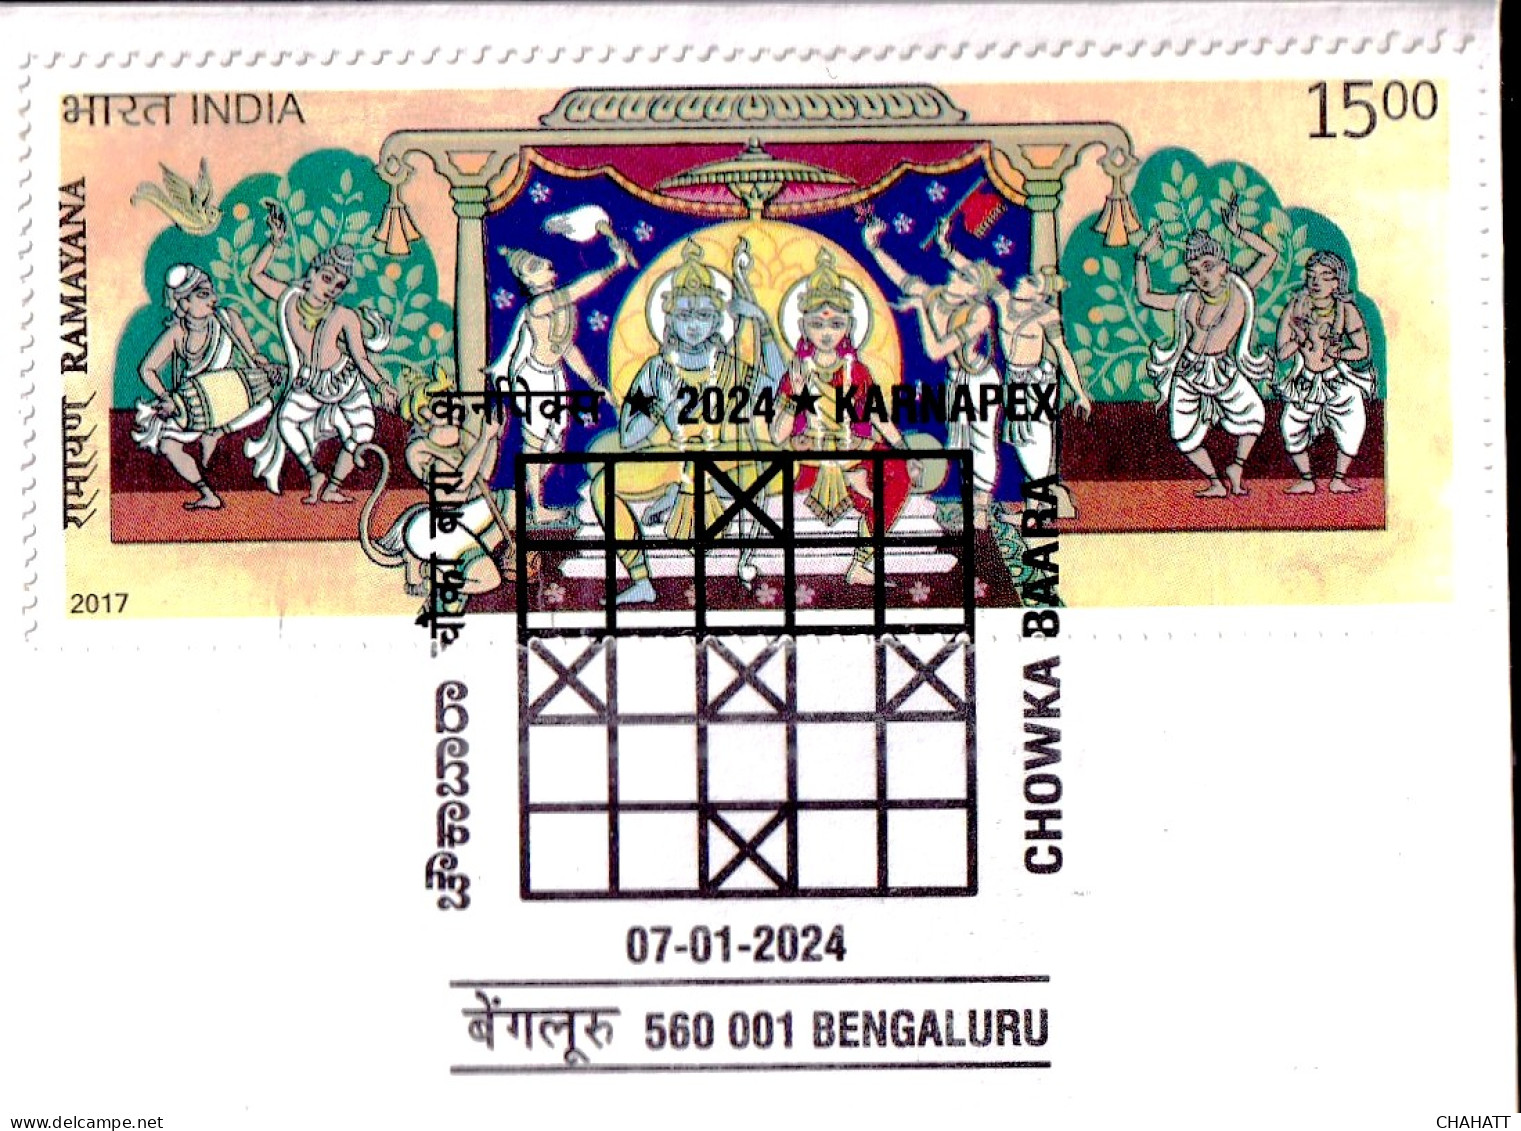 TRADITIONAL GAMES OF INDIA-  BOARD GAME-  CHOWKA BARA- COWRIE SHELLS- PICTORIAL CANCEL-SPECIAL COVER-INDIA POST-BX4-30 - Sin Clasificación